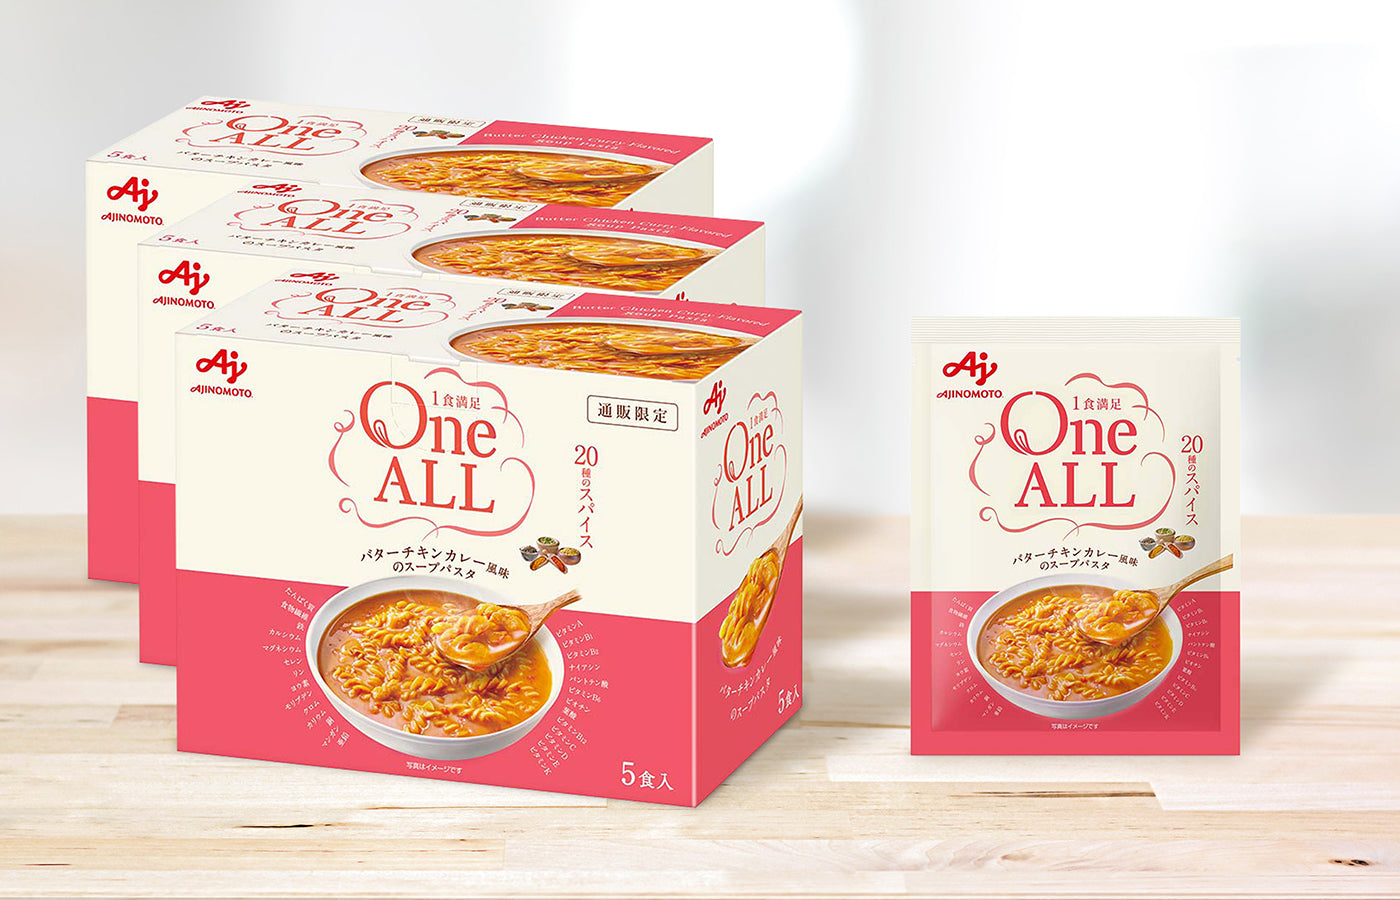 「One ALL」１５食入＜バターチキンカレー風味＞